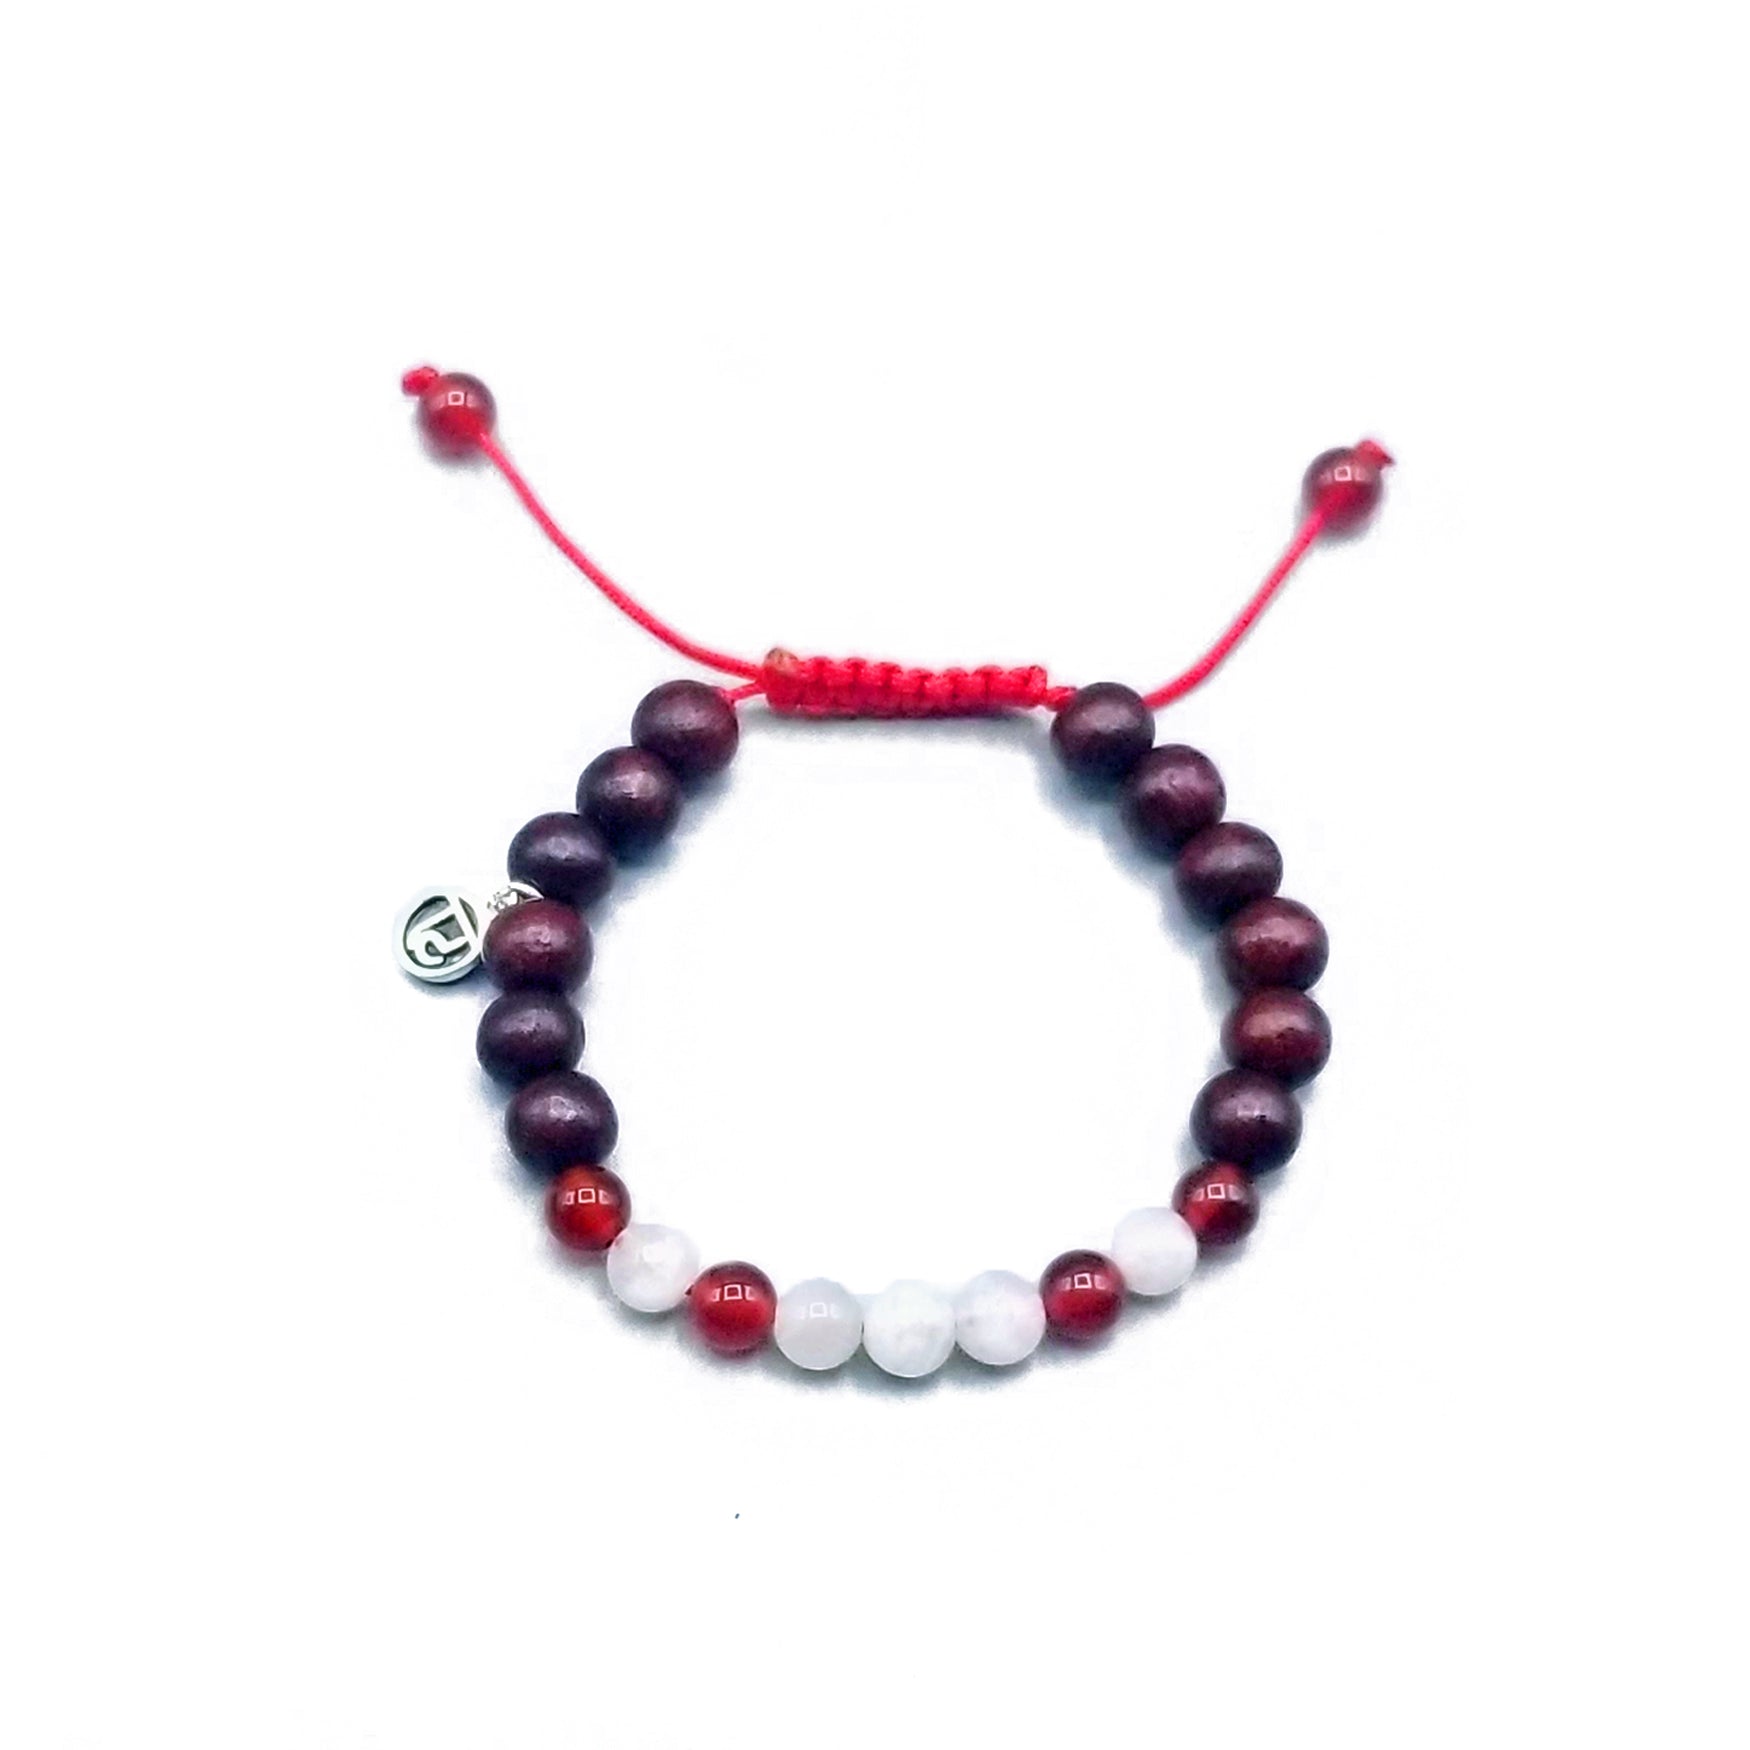 To the Moon and Back Mala Bracelet.